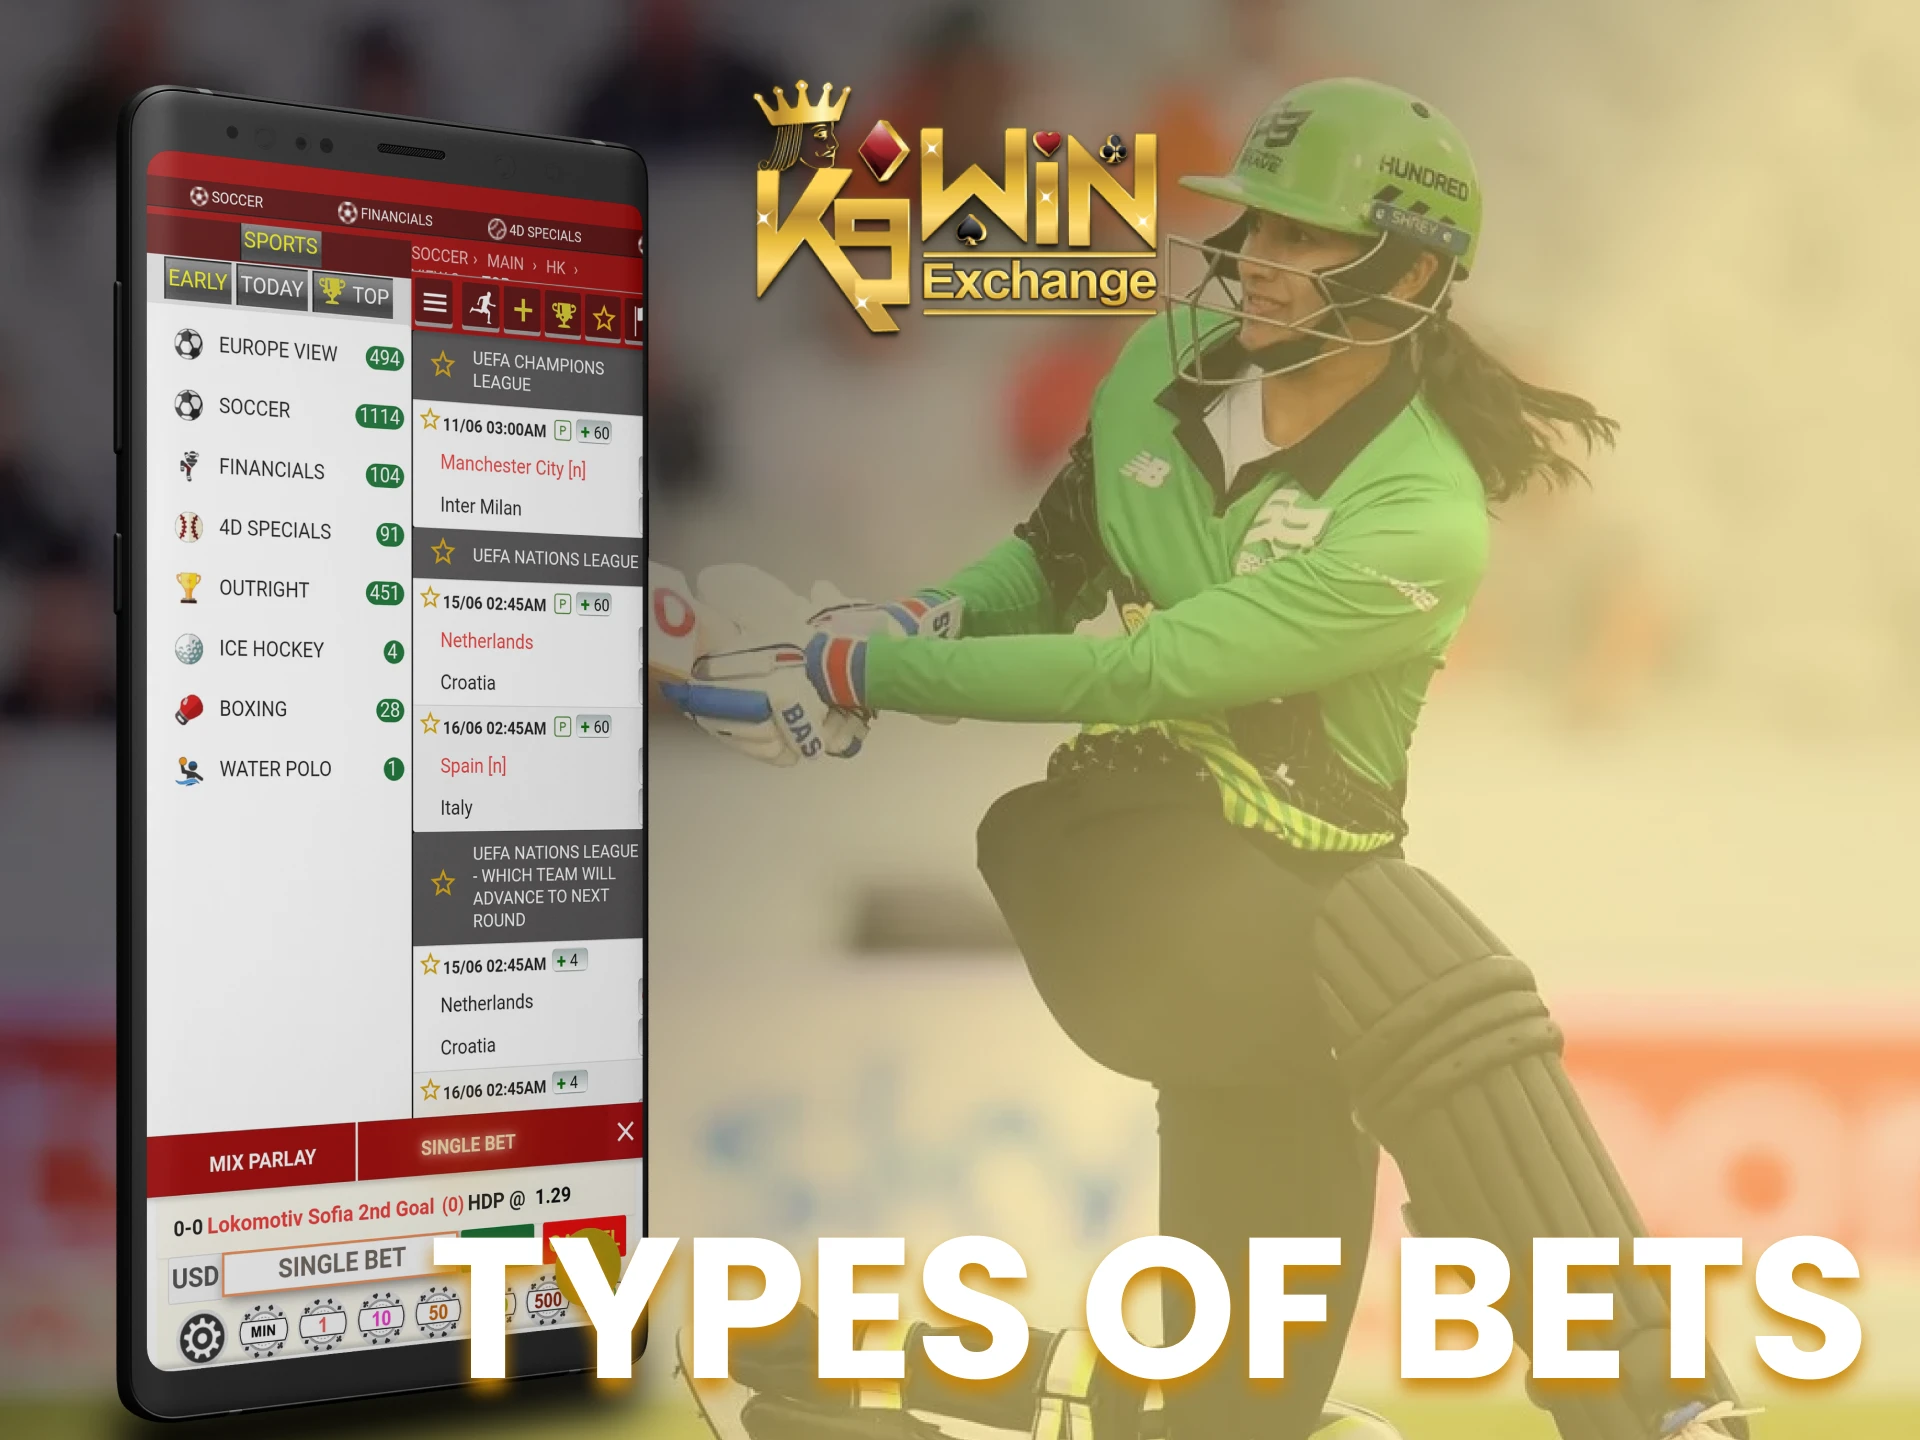 Learn more about different bet types in the K9Win app.